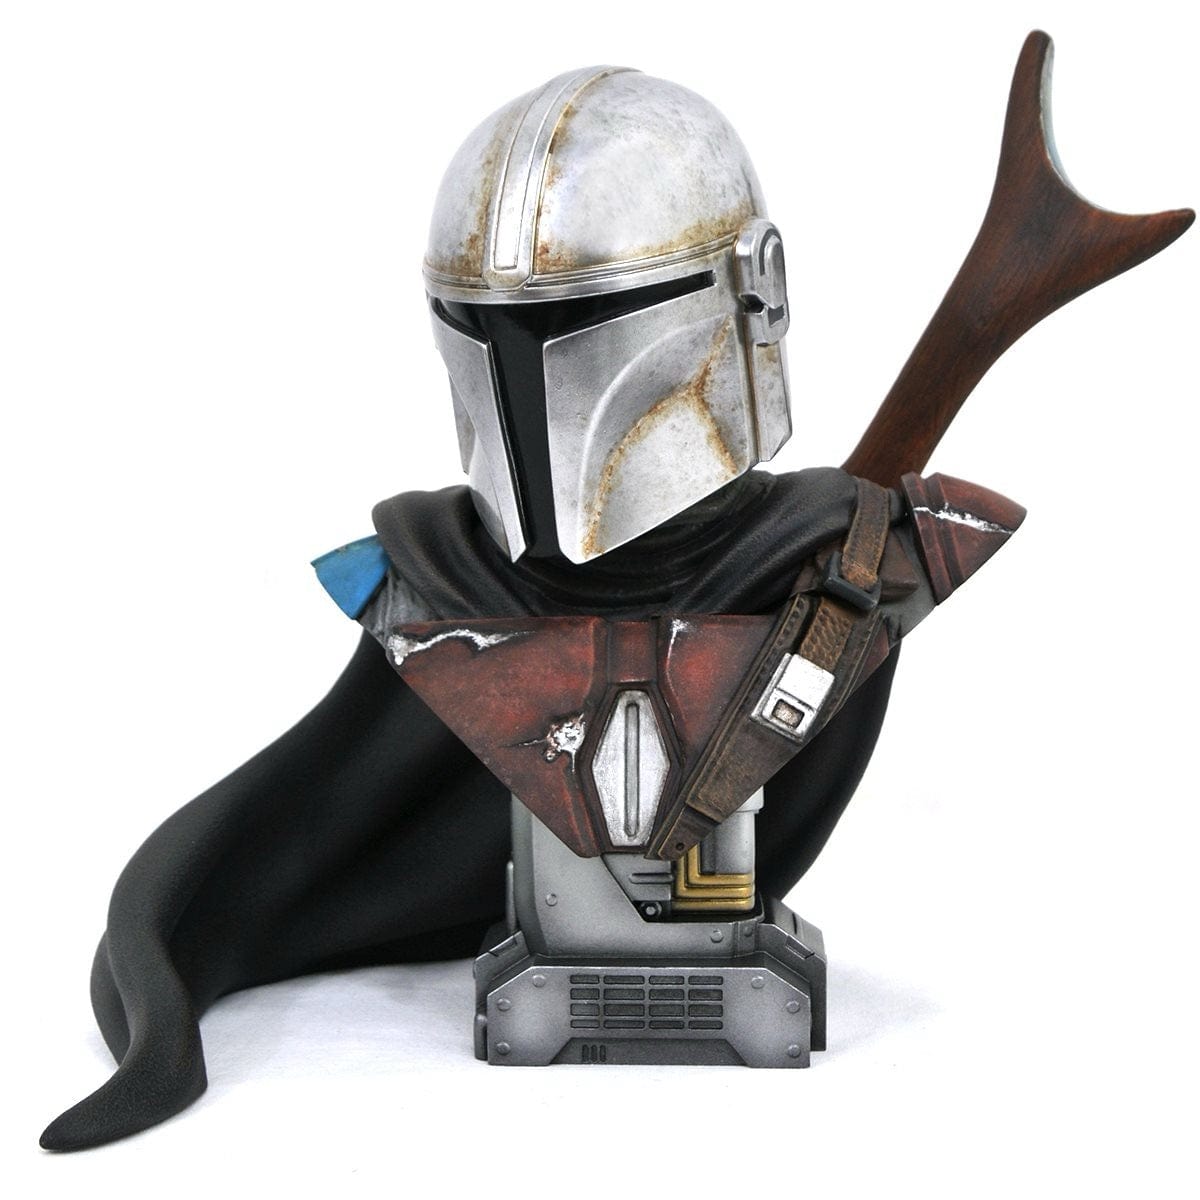 Diamond Select Toys Legends in 3-Dimensions Star Wars Mandalorian 1:2 Scale Bust